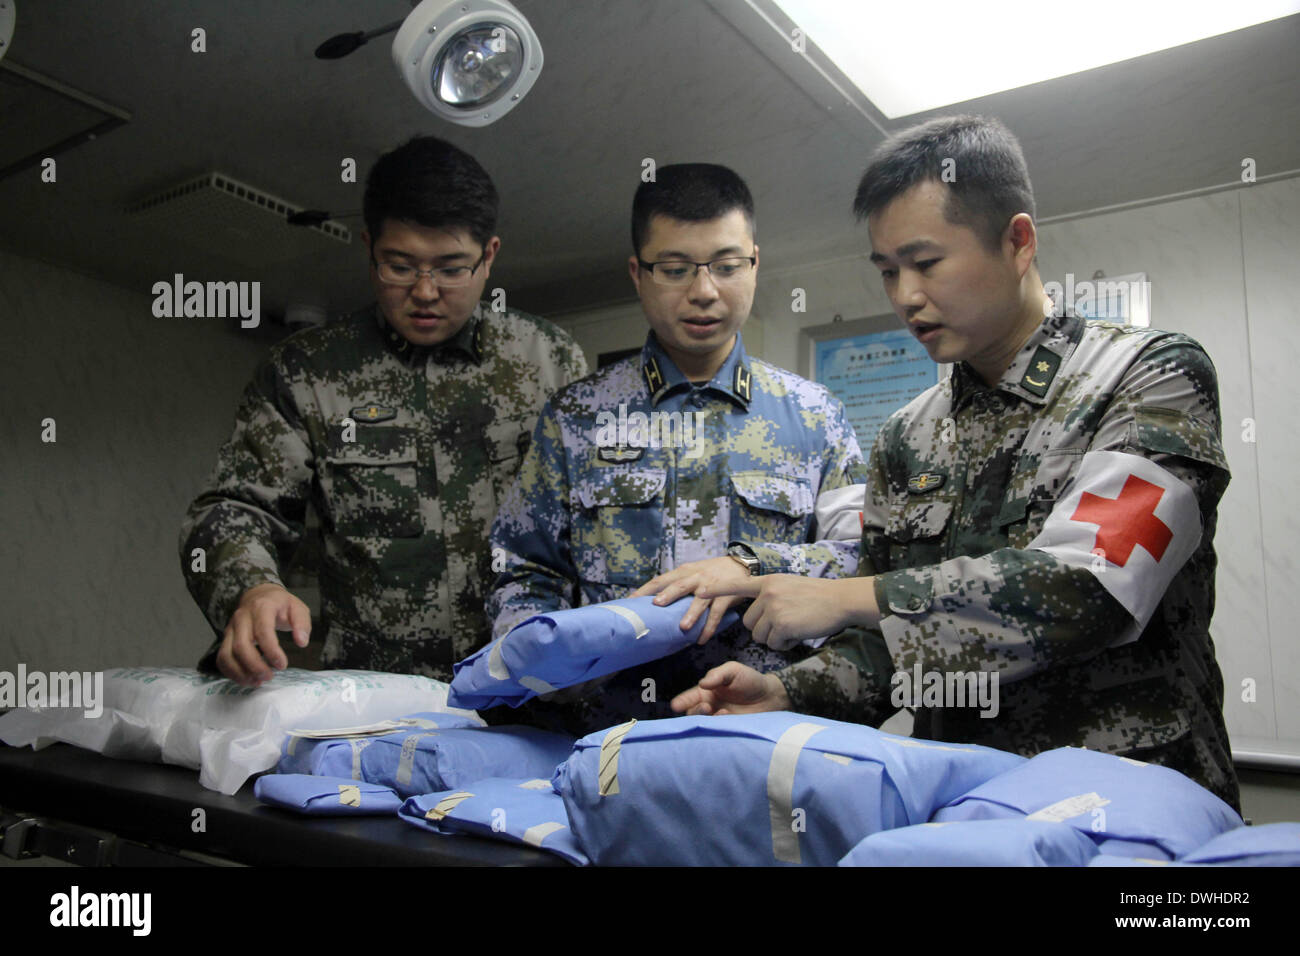 Zhanjiang. 9th March 2014. Members of a medical contingent check medical supplies on board of Chinese navy warship 'Jinggangshan' at Zhanjiang Port of south China's Guangdong Province, March 8, 2014. Upon the approval of the Central Military Commission, the amphibious landing ship 'Jinggangshan', loaded with life-saving equipments, underwater detection facilities and supplies of oil, water and food, set out from Zhanjiang port at about 3:00 a.m. on Sunday for search and rescue mission to sea area where missing Malaysia Airline flight MH 370 may have crashed. Stock Photo